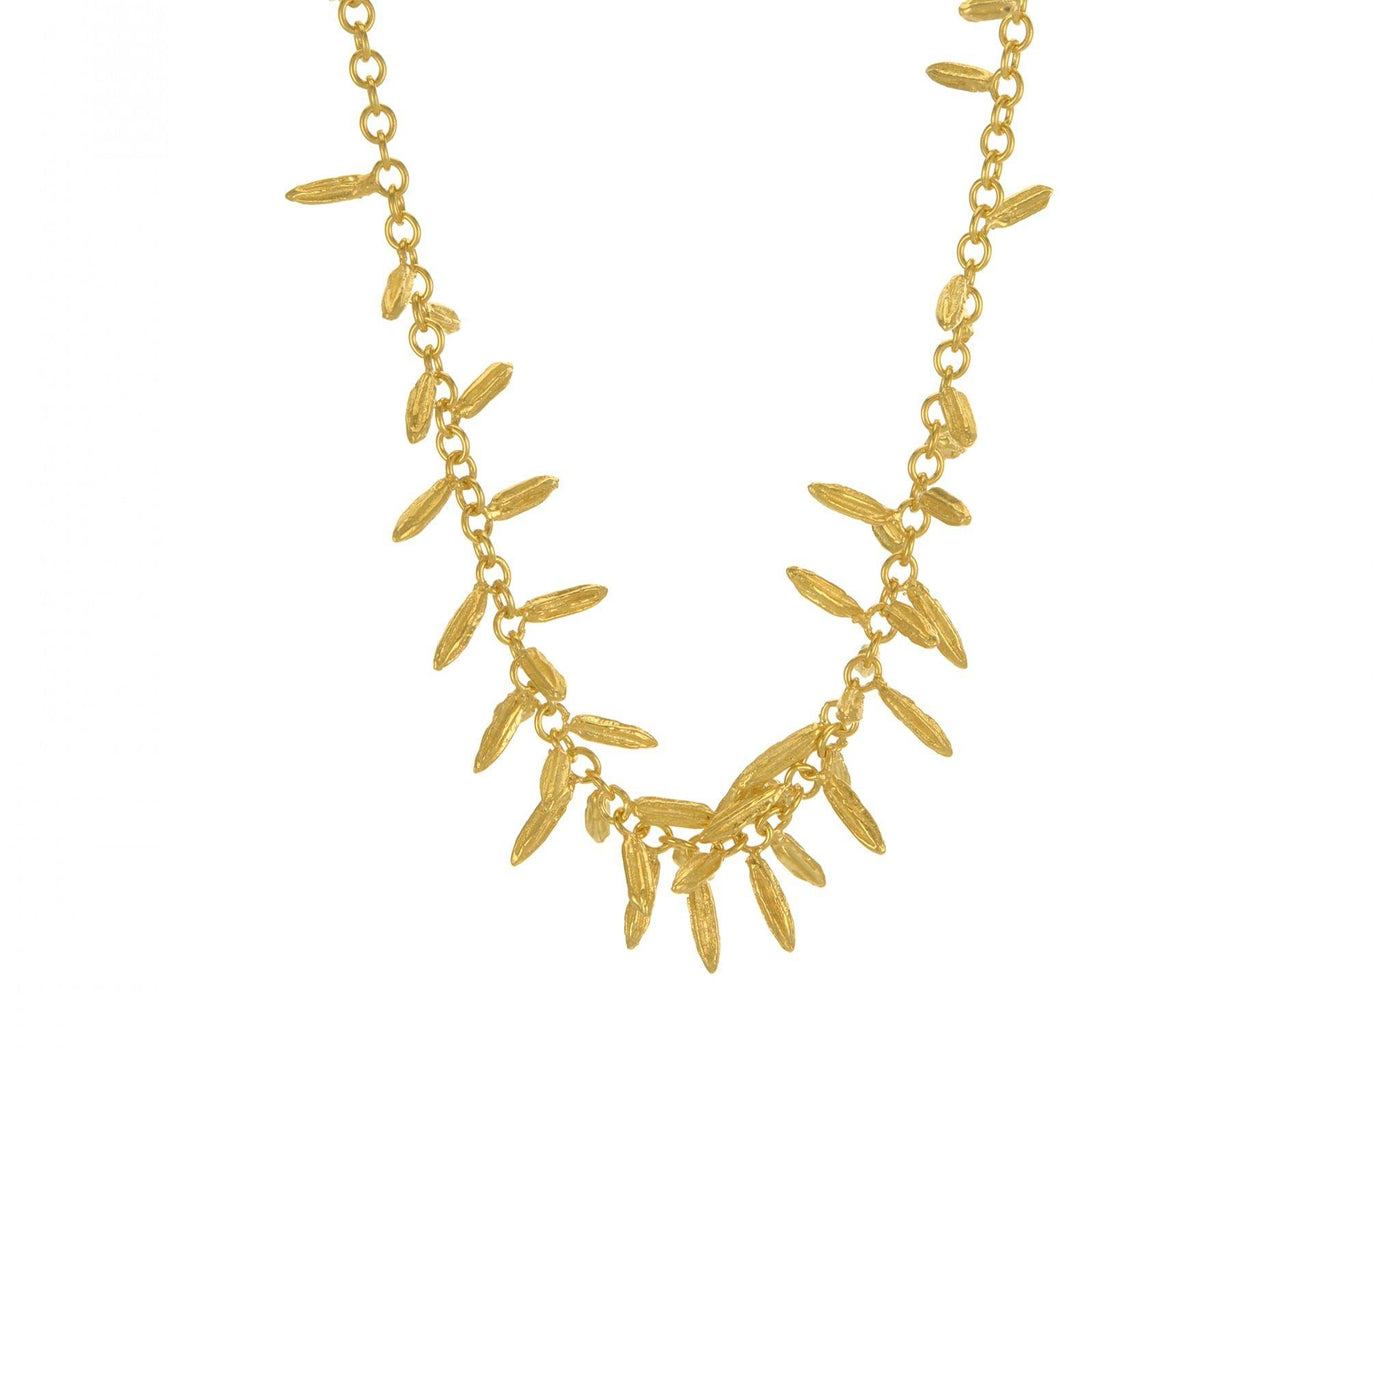 Alex Monroe Fennel Kissing Seed Necklace - 22ct Gold Plate - Rococo Jewellery